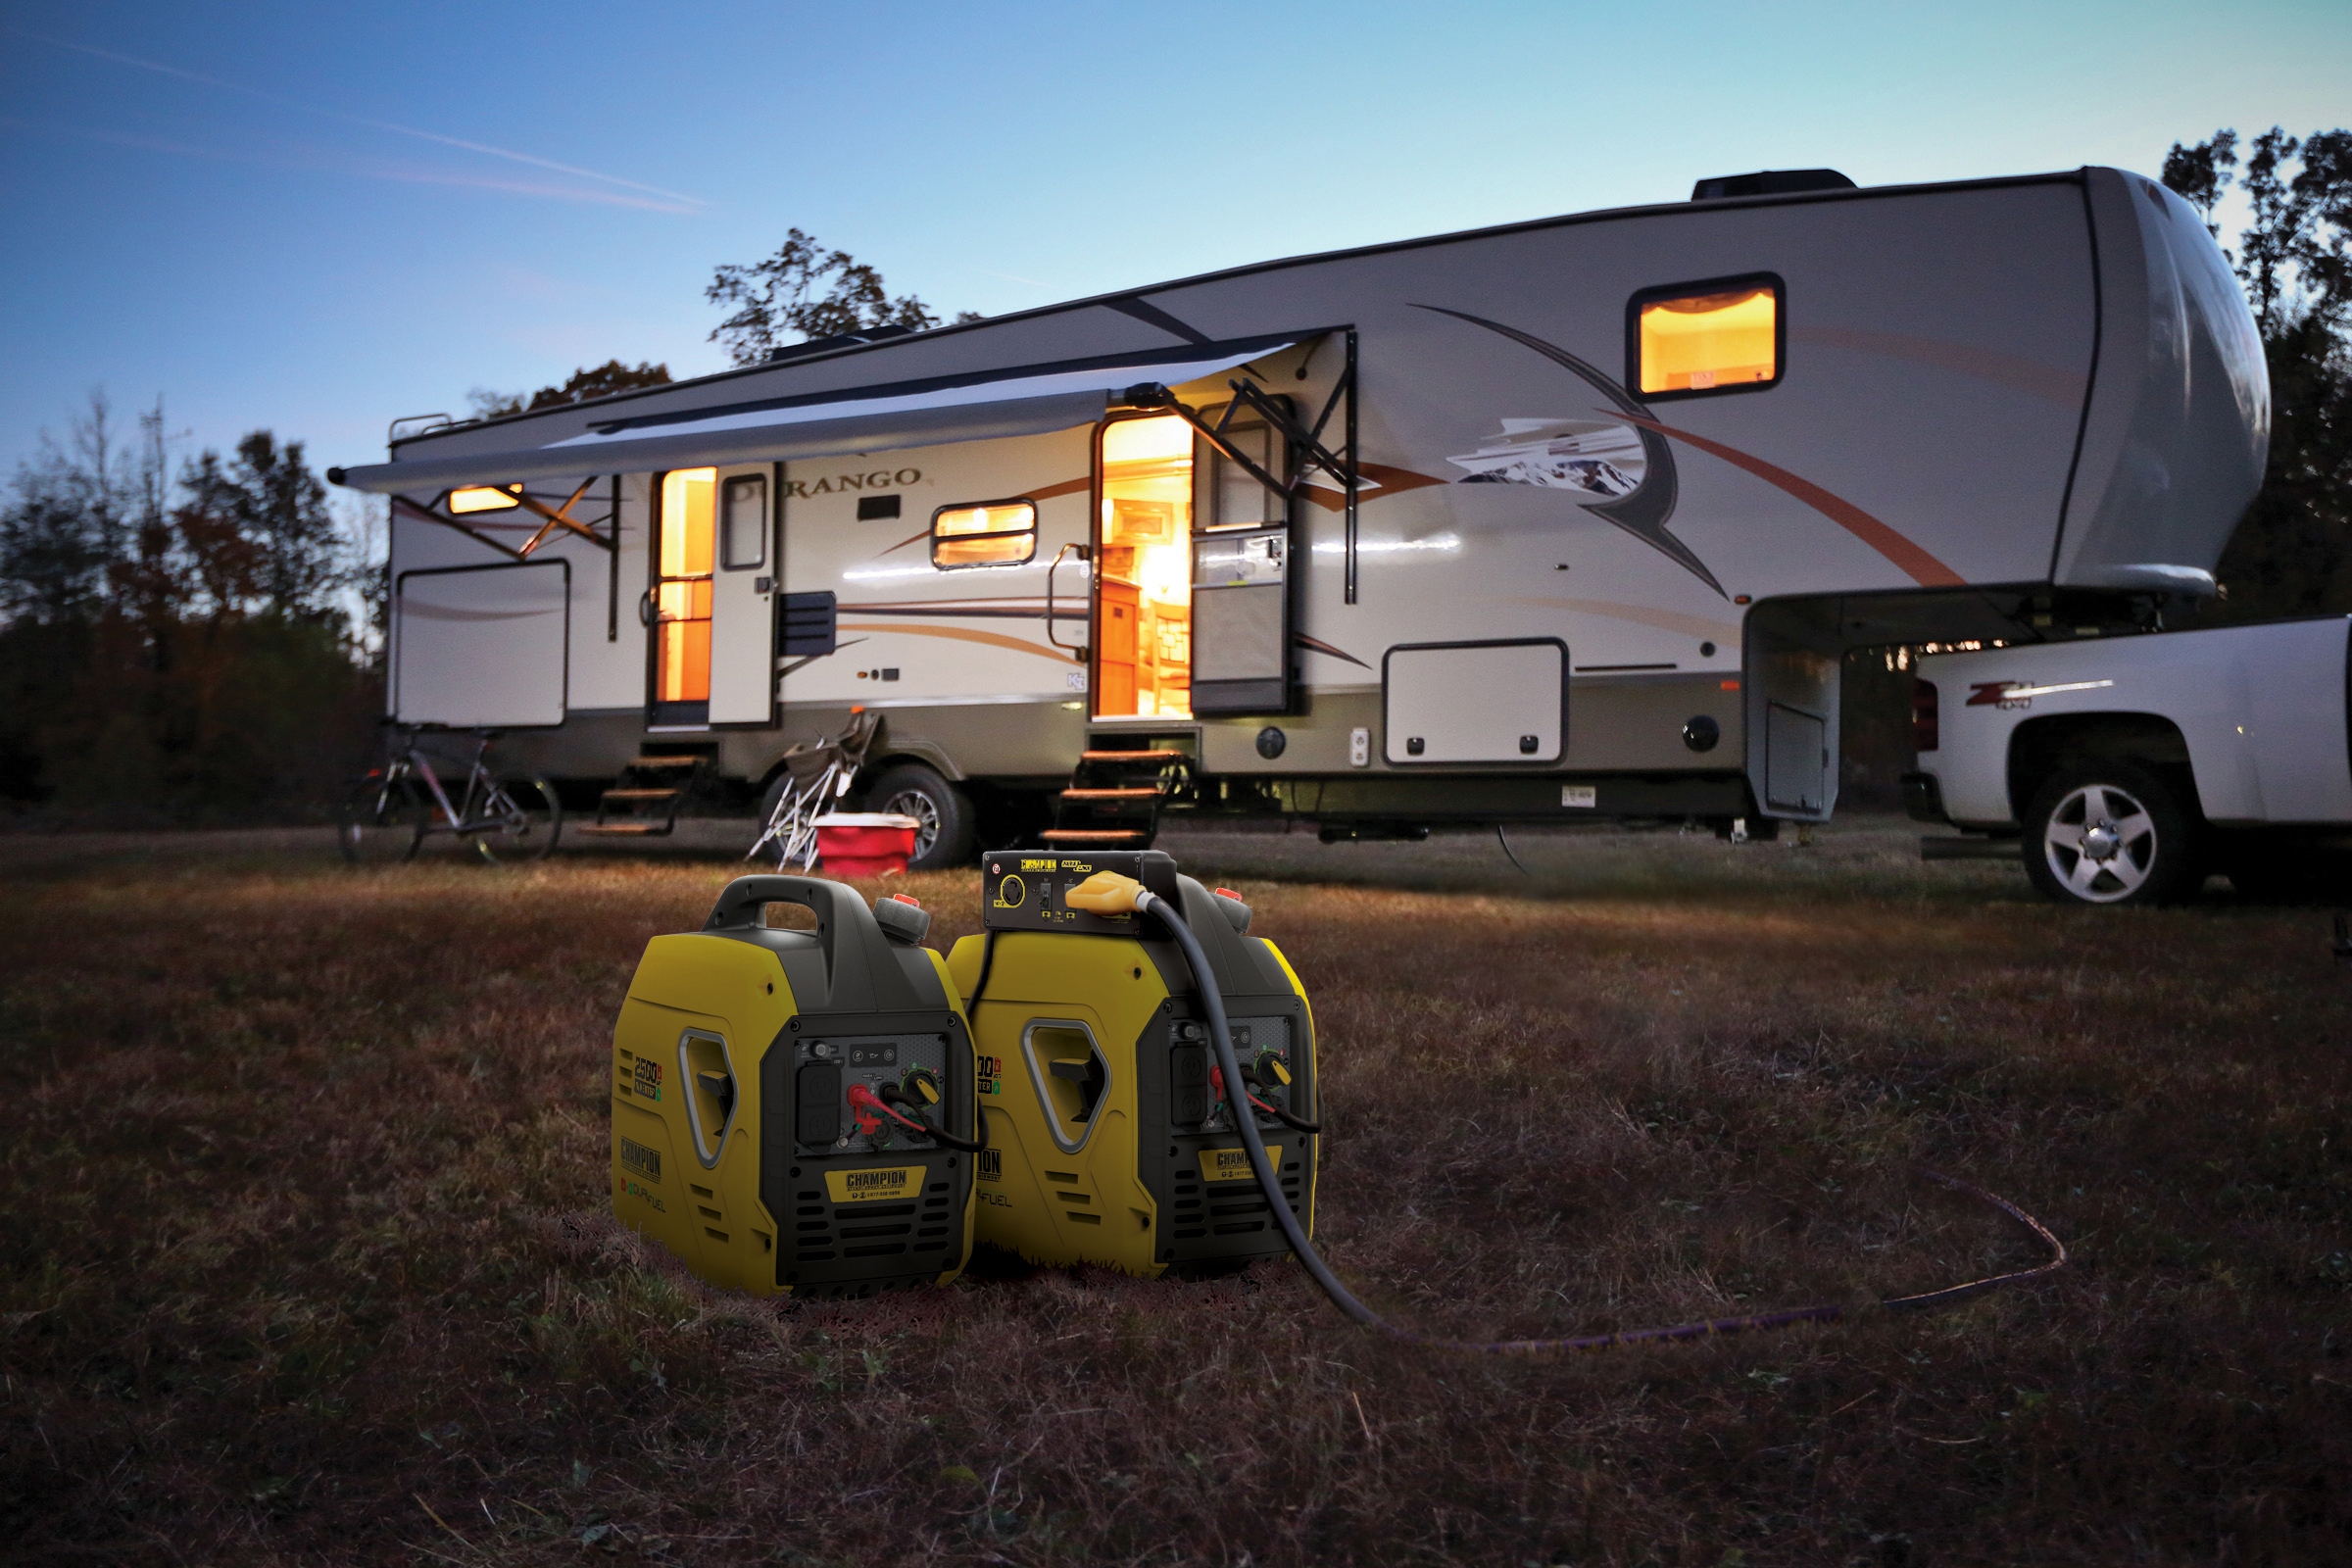 Portable Power Stations Versus Gas-Powered Generators: Which is Right for You?